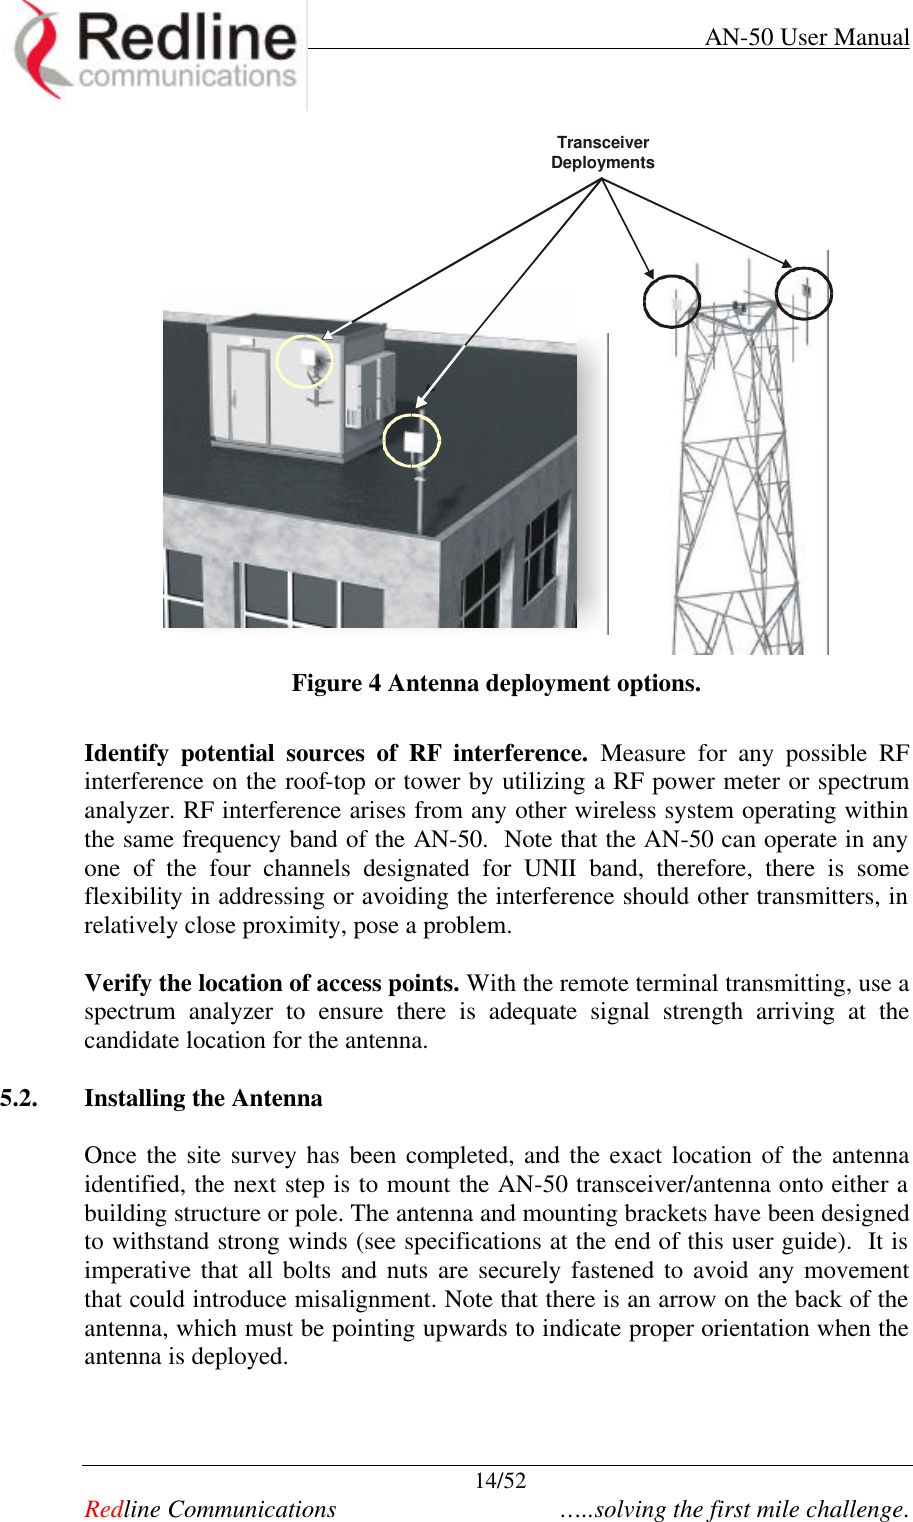     AN-50 User Manual  14/52   Redline Communications    …..solving the first mile challenge.  Transceiver Deployments  Figure 4 Antenna deployment options.  Identify potential sources of RF interference. Measure for any possible RF interference on the roof-top or tower by utilizing a RF power meter or spectrum analyzer. RF interference arises from any other wireless system operating within the same frequency band of the AN-50.  Note that the AN-50 can operate in any one of the four channels designated for UNII band, therefore, there is some flexibility in addressing or avoiding the interference should other transmitters, in relatively close proximity, pose a problem.      Verify the location of access points. With the remote terminal transmitting, use a spectrum analyzer to ensure there is adequate signal strength arriving at the candidate location for the antenna.  5.2. Installing the Antenna   Once the site survey has been completed, and the exact location of the antenna identified, the next step is to mount the AN-50 transceiver/antenna onto either a building structure or pole. The antenna and mounting brackets have been designed to withstand strong winds (see specifications at the end of this user guide).  It is imperative that all bolts and nuts are securely fastened to avoid any movement that could introduce misalignment. Note that there is an arrow on the back of the antenna, which must be pointing upwards to indicate proper orientation when the antenna is deployed.     